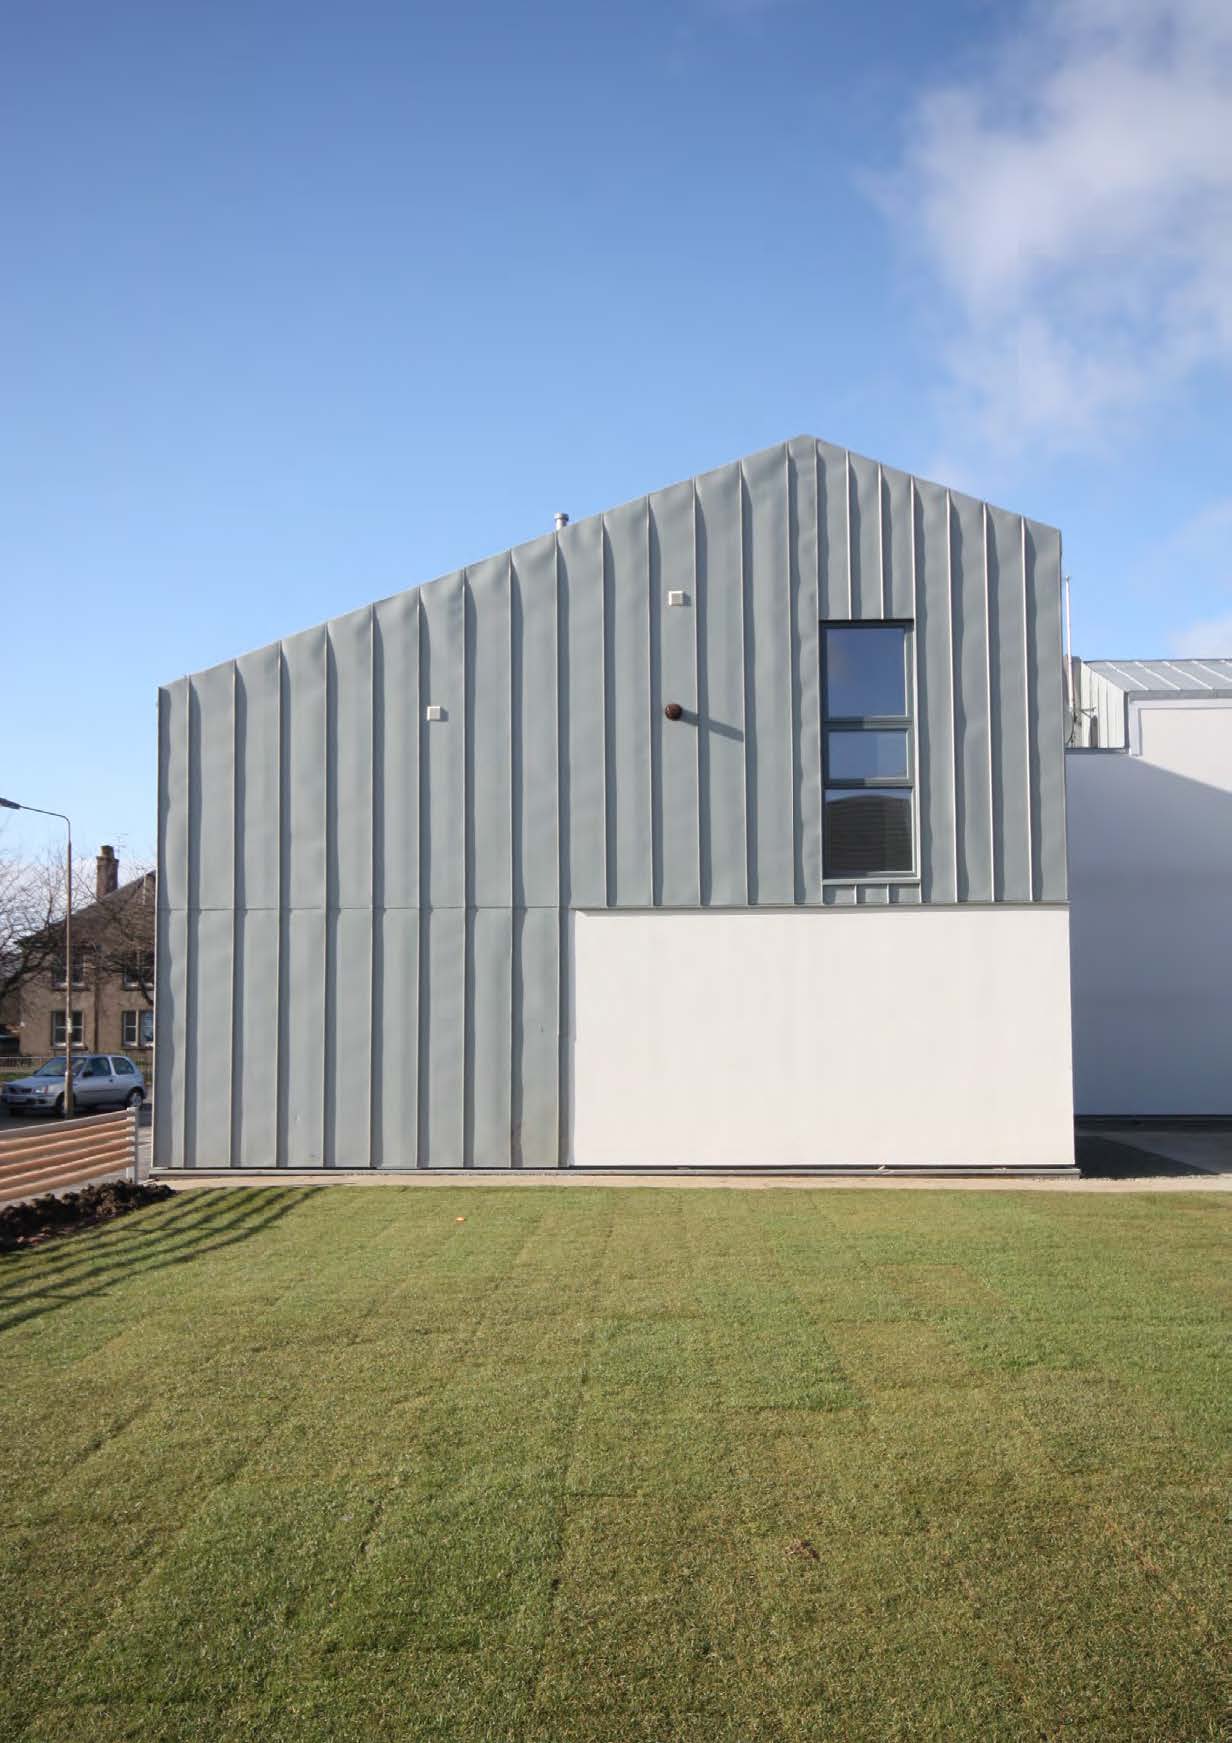 A photograph of the gable end of a two storey building with one tall window, a white rendered wall and grey zinc cladding 